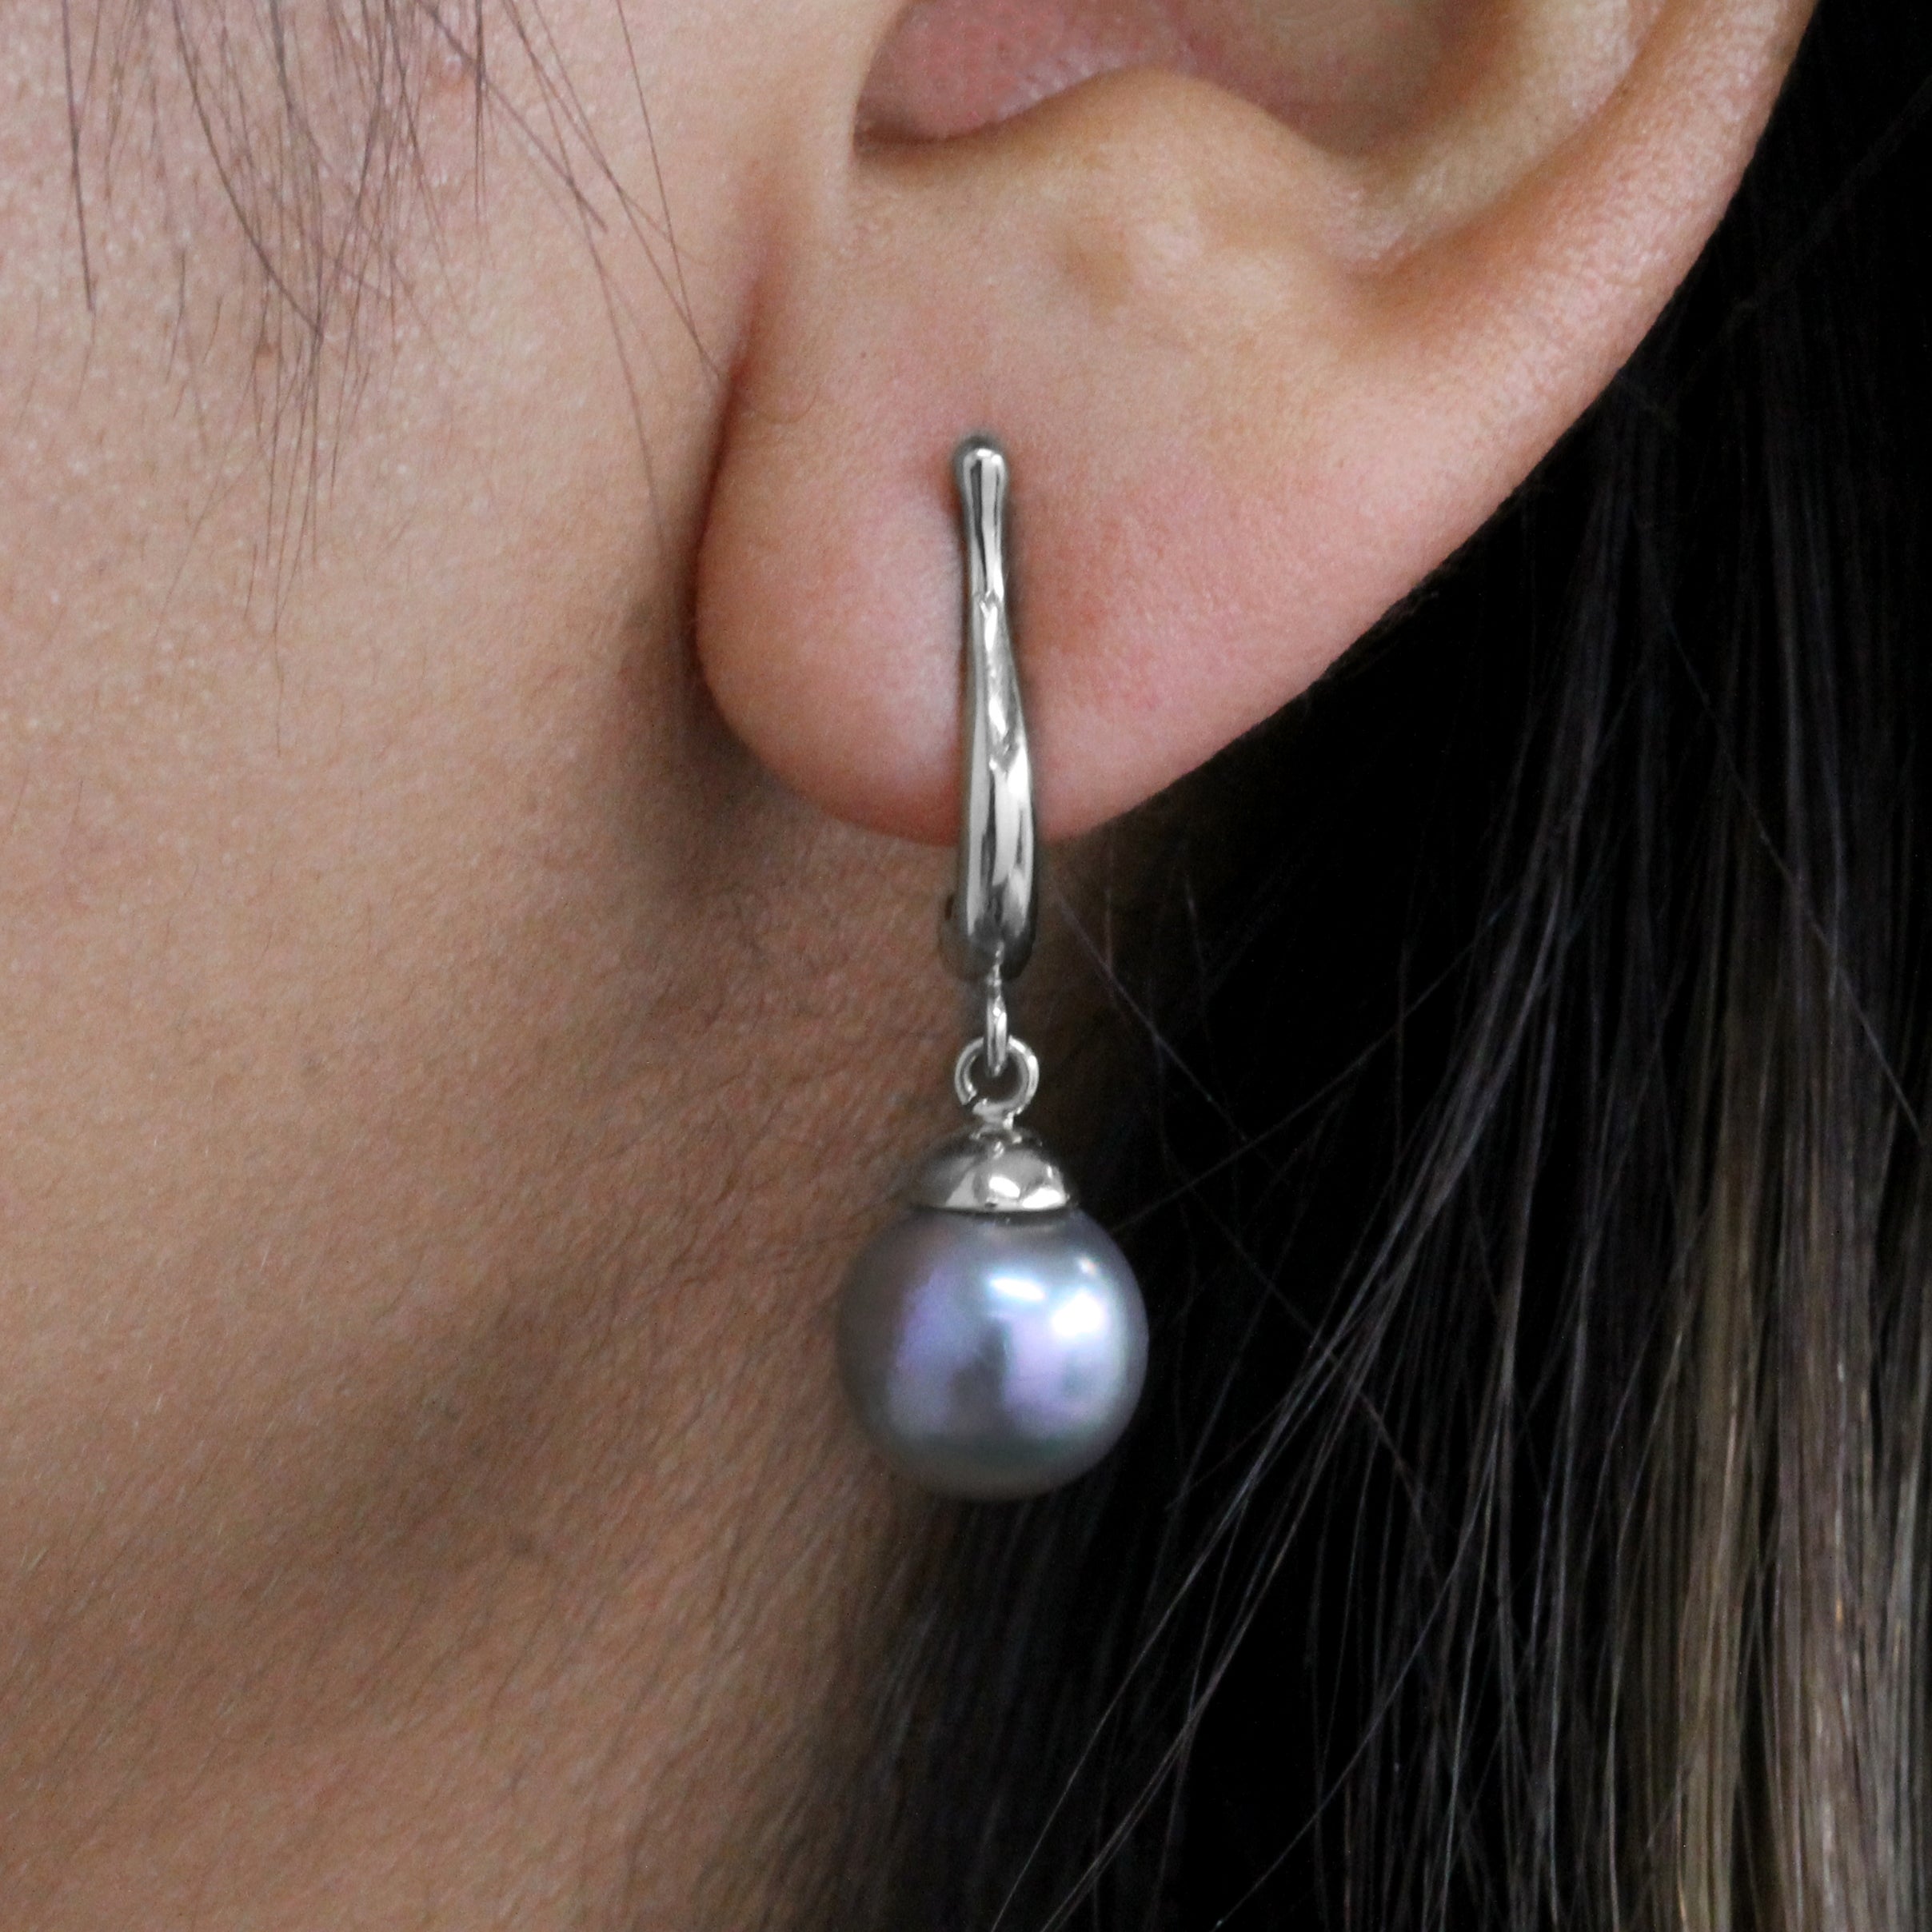 Purple with Sky Blue Pair of Cortez Pearls on "Lyre" 14K White Gold Earrings